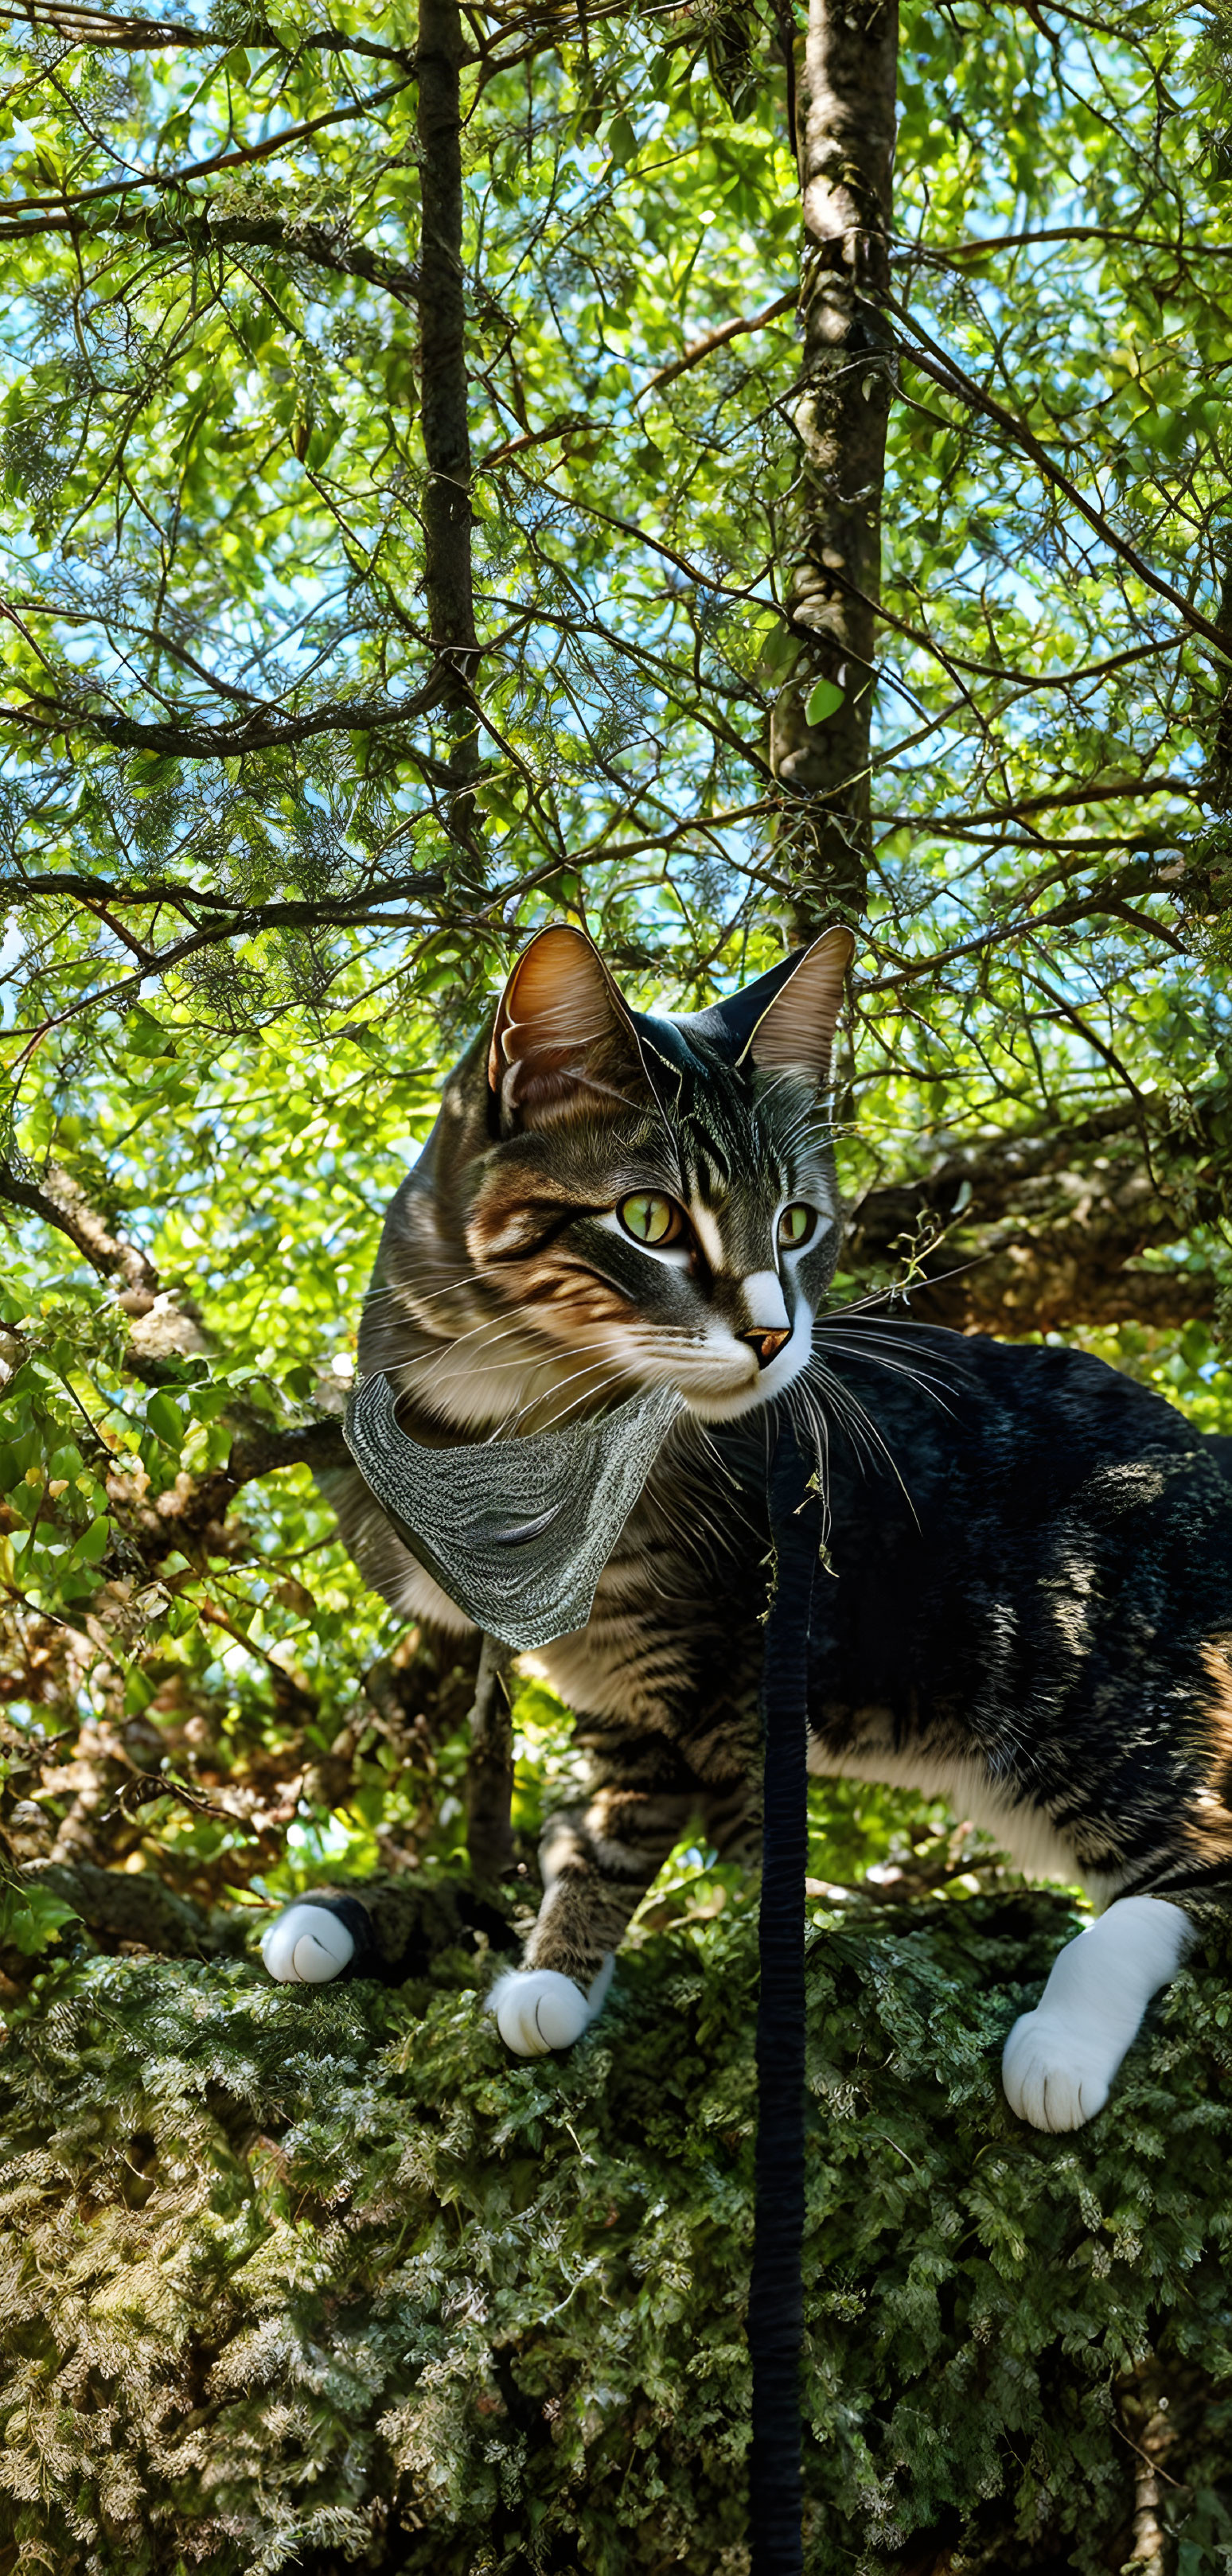 Tabby Cat in Harness Explores Moss-Covered Tree Trunk